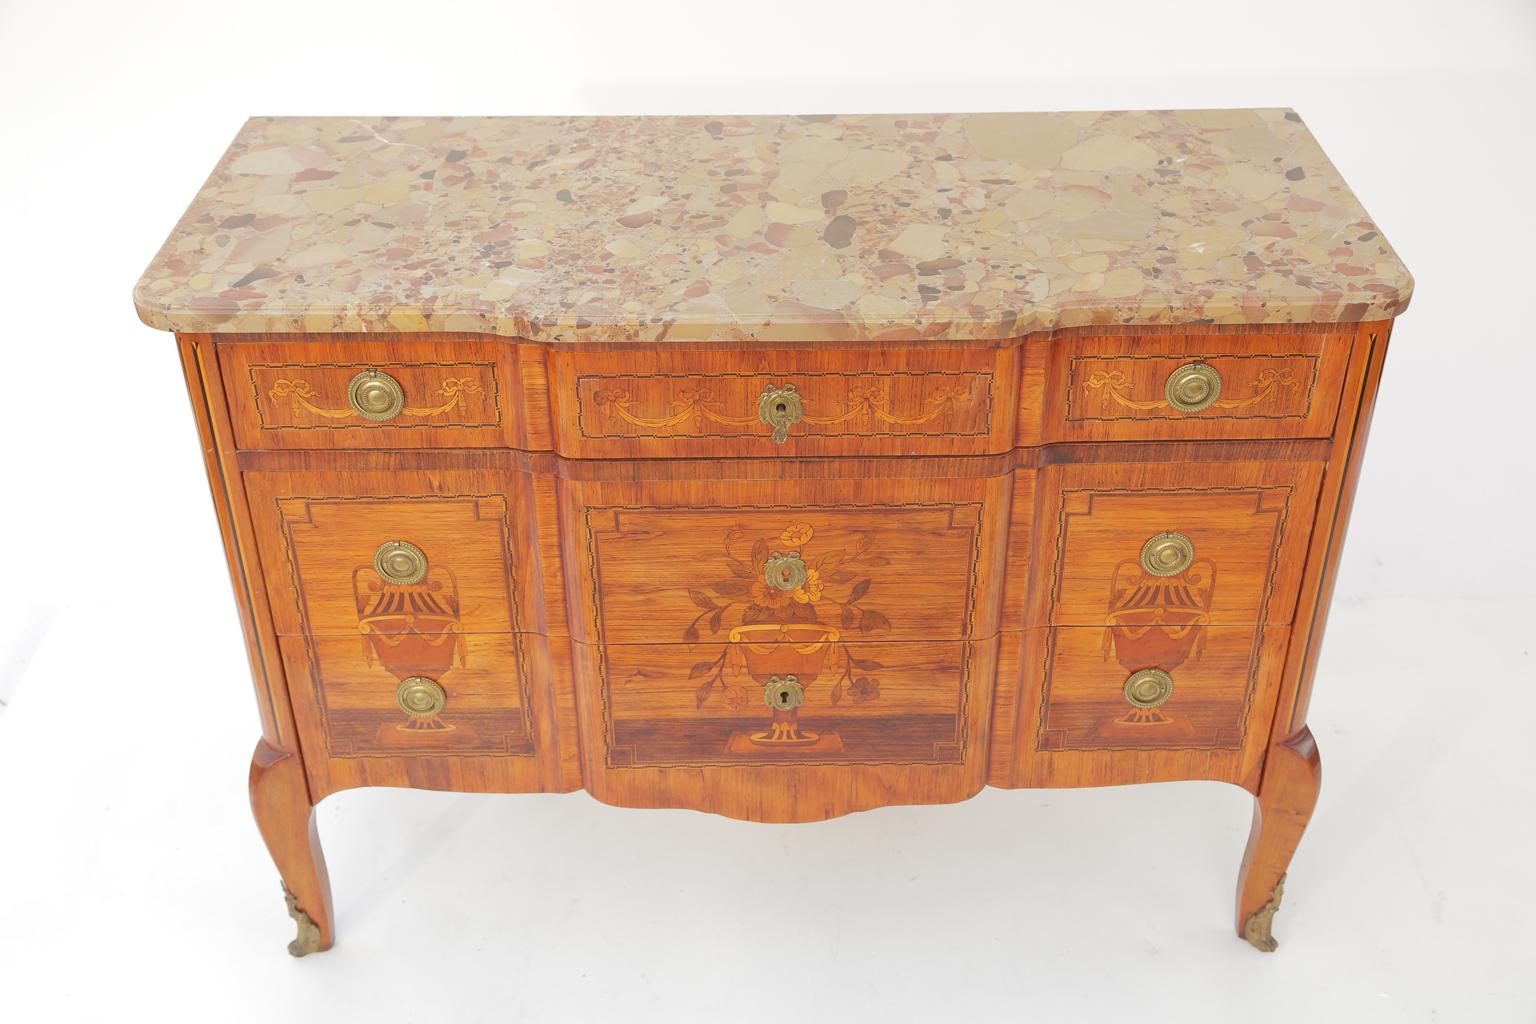 Early 19th Century Marquetry Commode For Sale 2